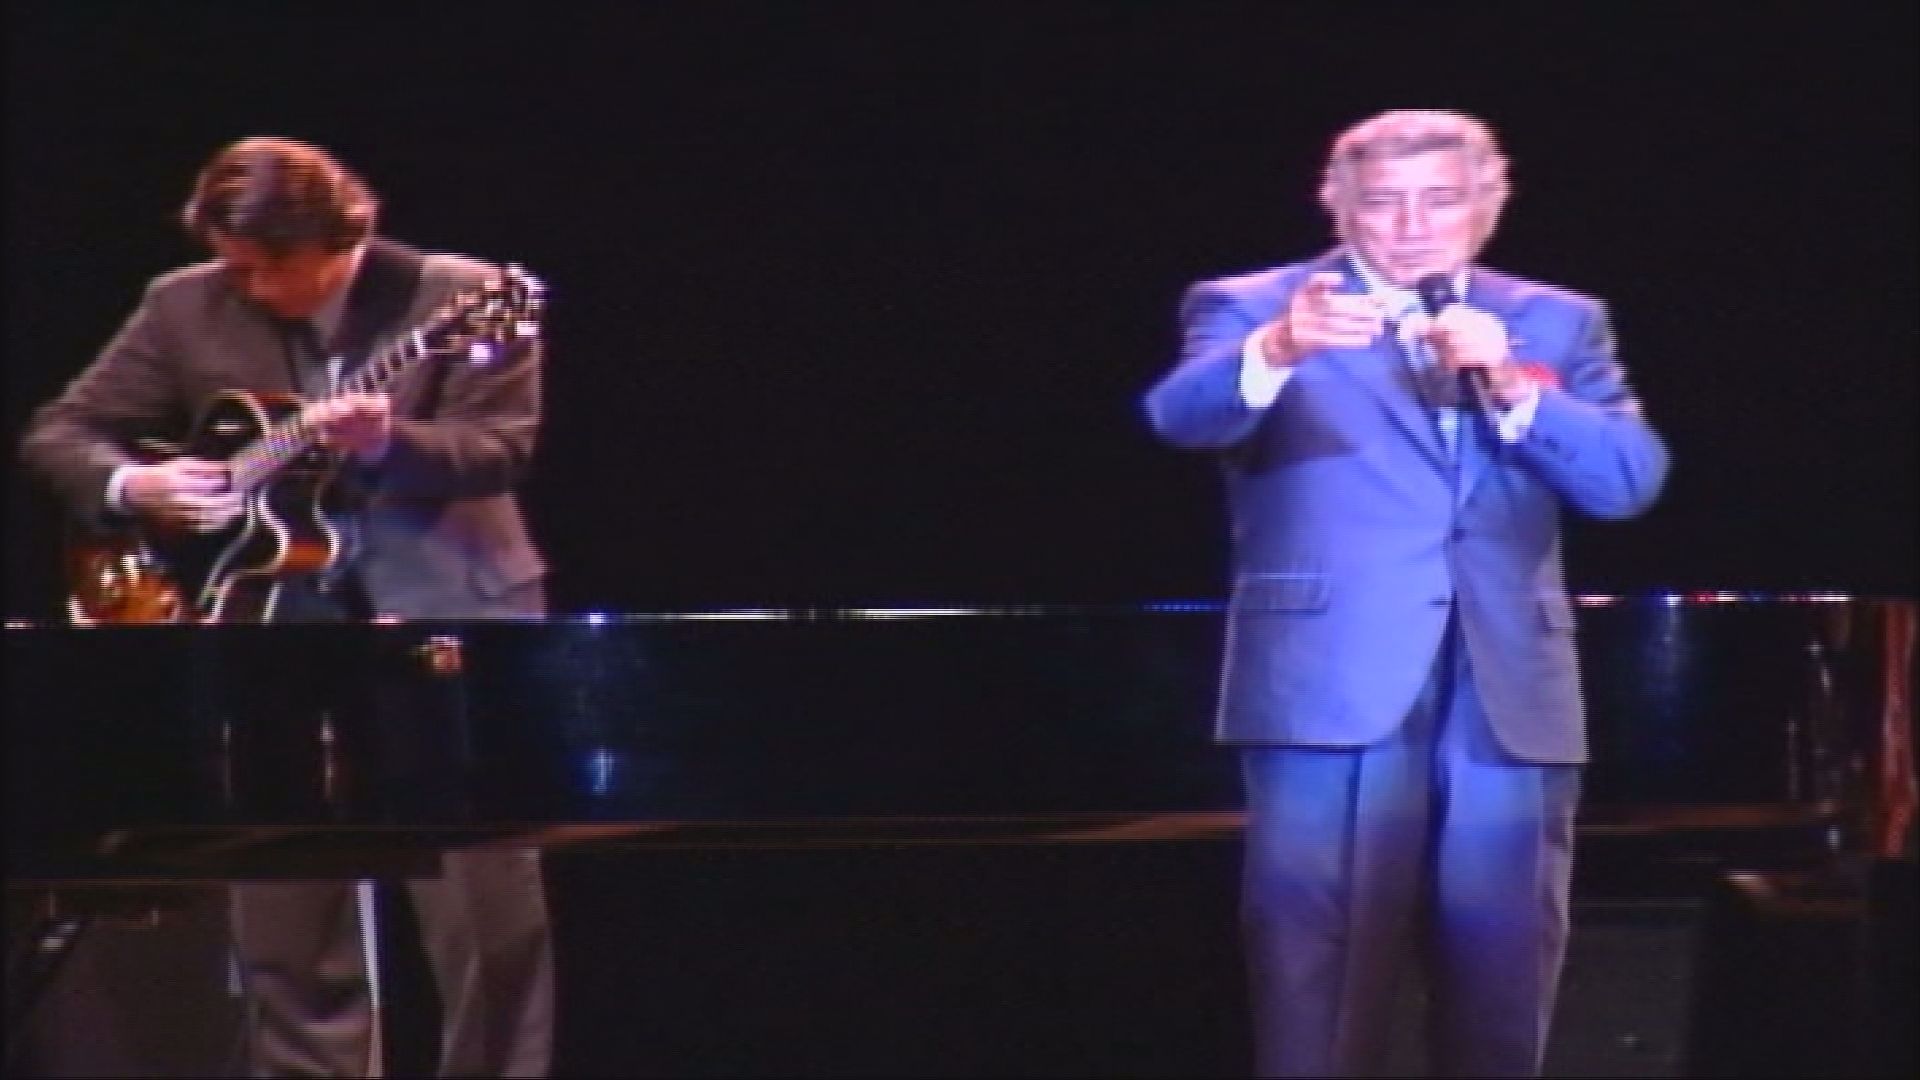 The Cumberland County Civic Center (now the Cross Insurance Arena) in Portland had the distinction of being the 1st stop on Tony Bennett's concert tour in July 2001